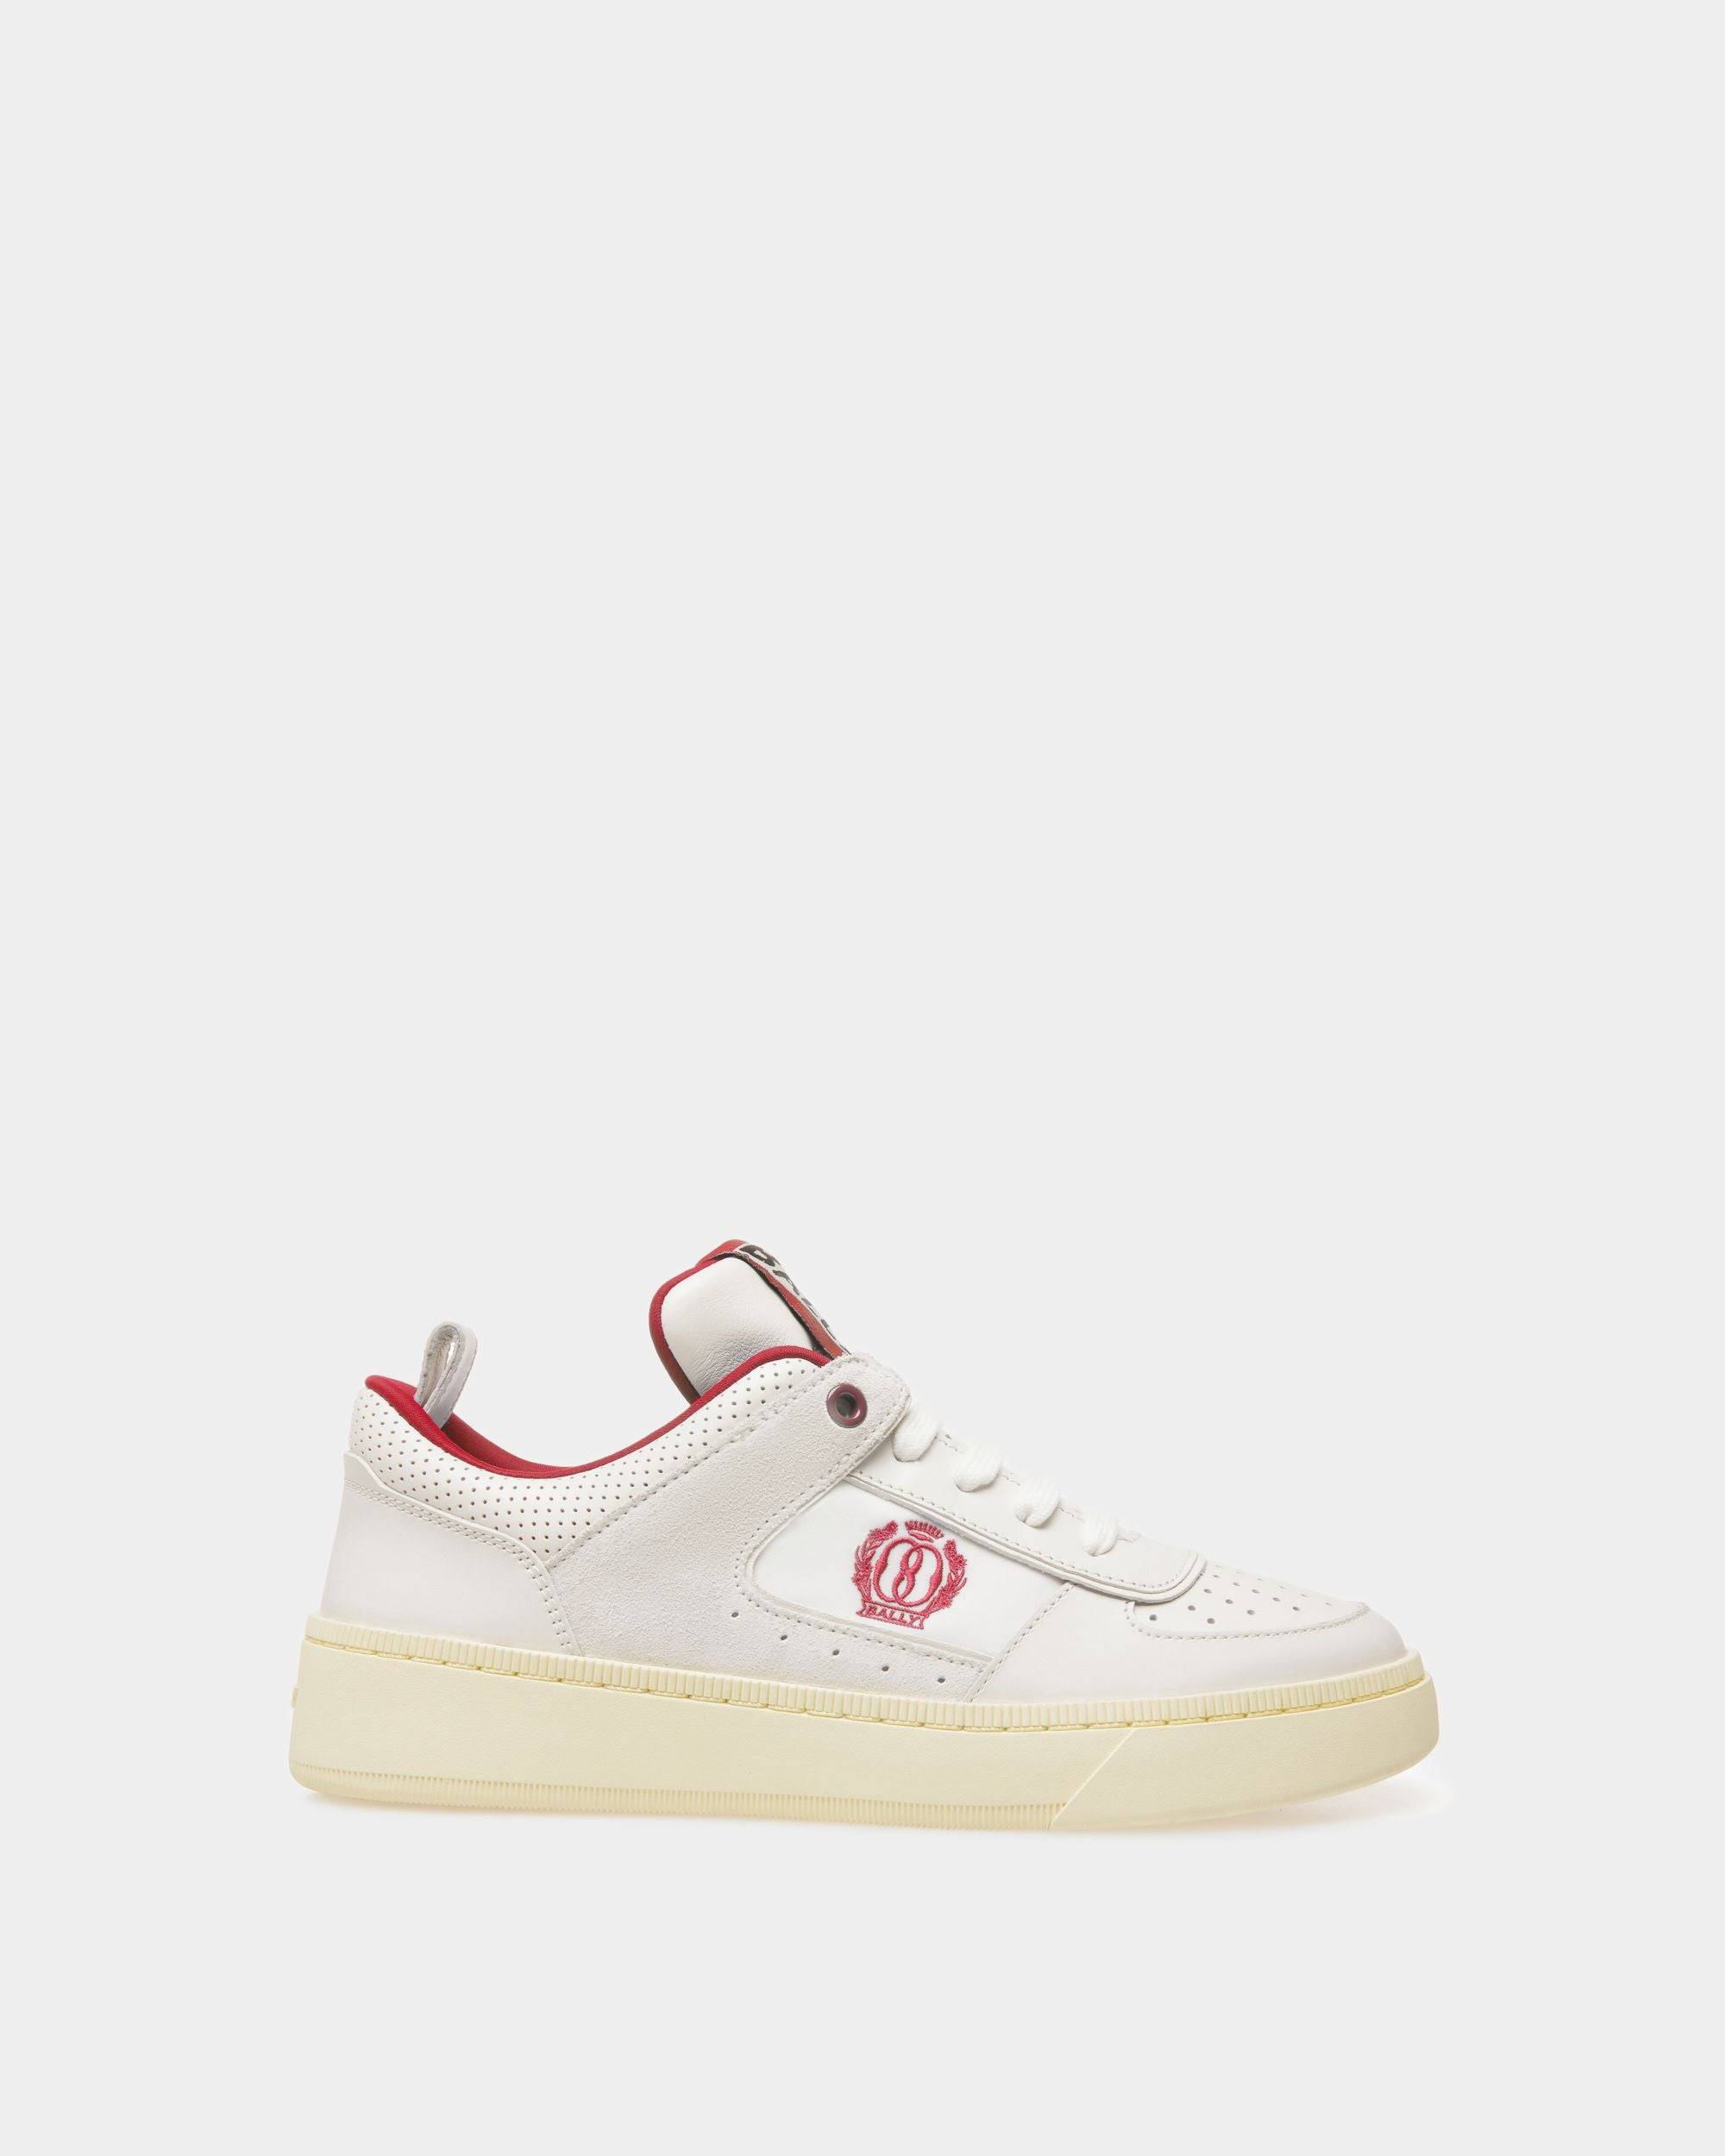 Women's Raise Sneakers In White And Red Leather | Bally | Still Life Side